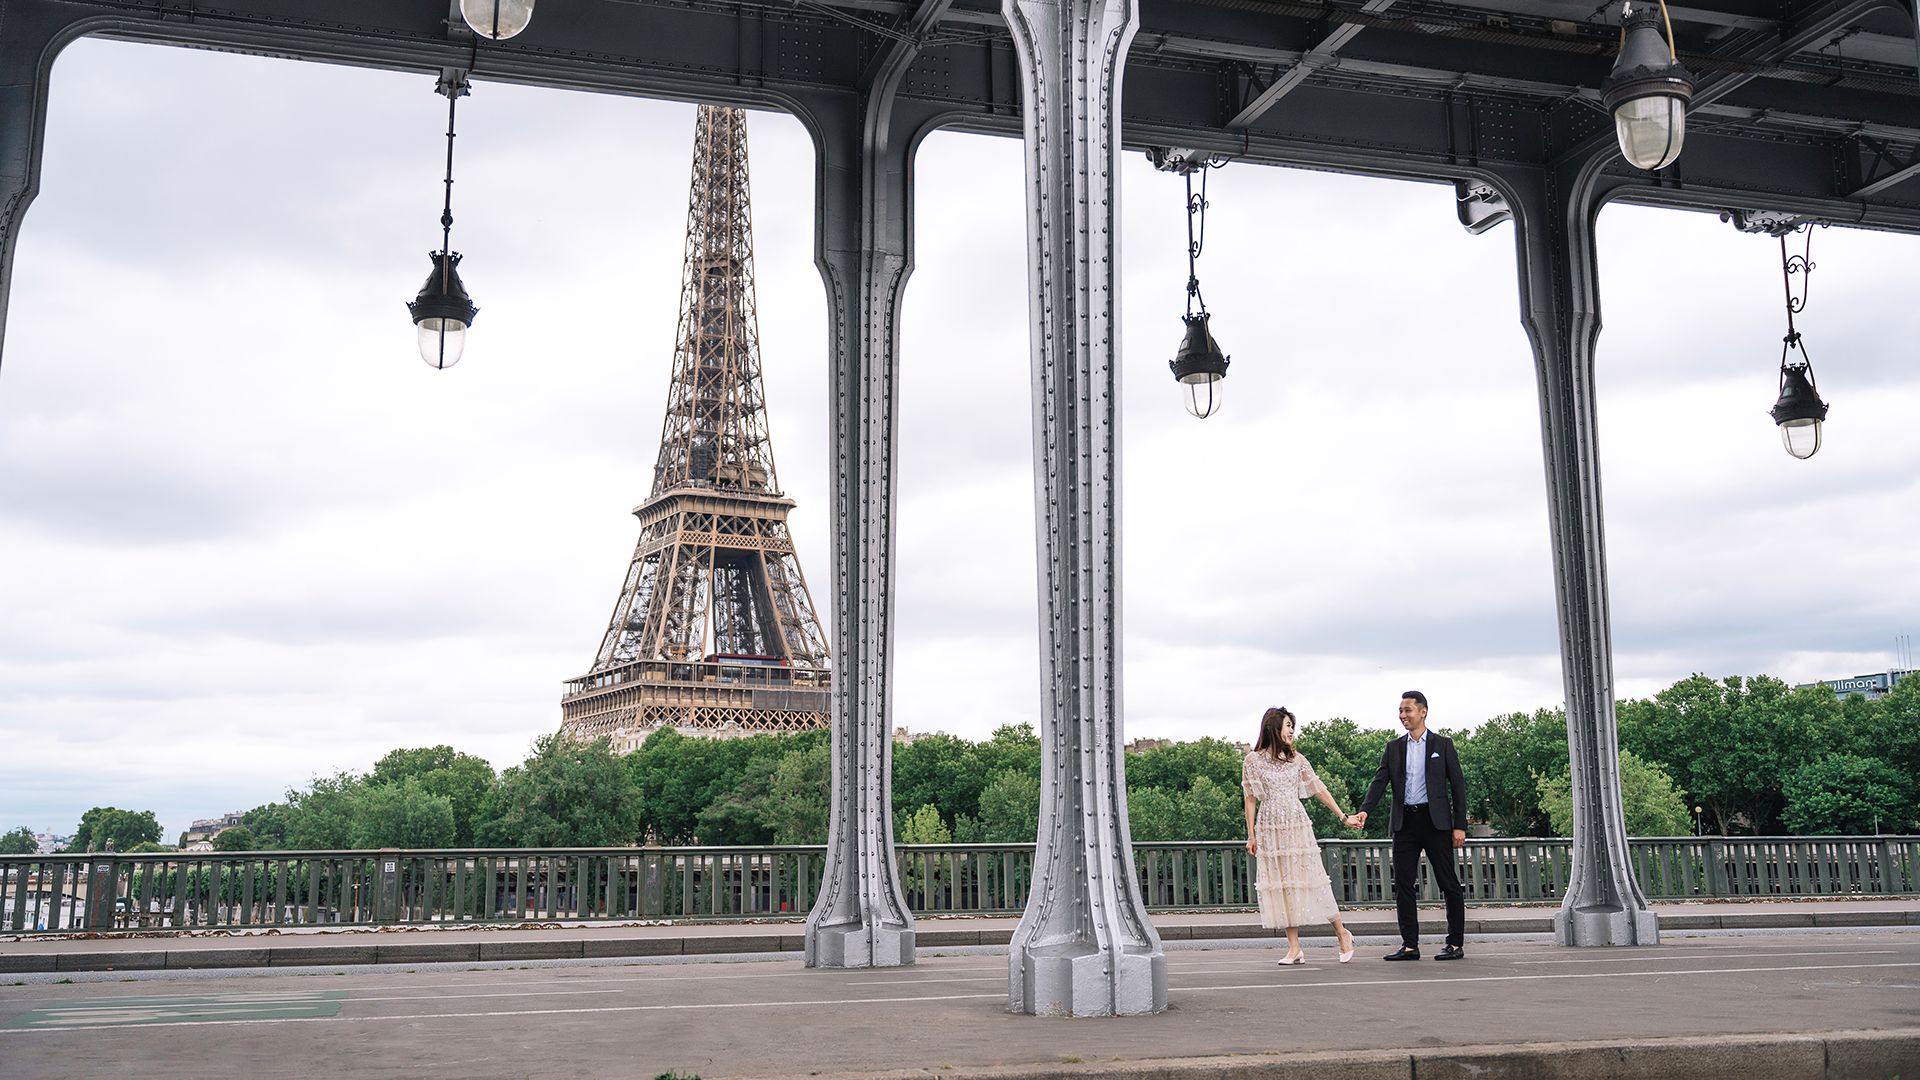 How to find a perfect destination Wedding photographer?